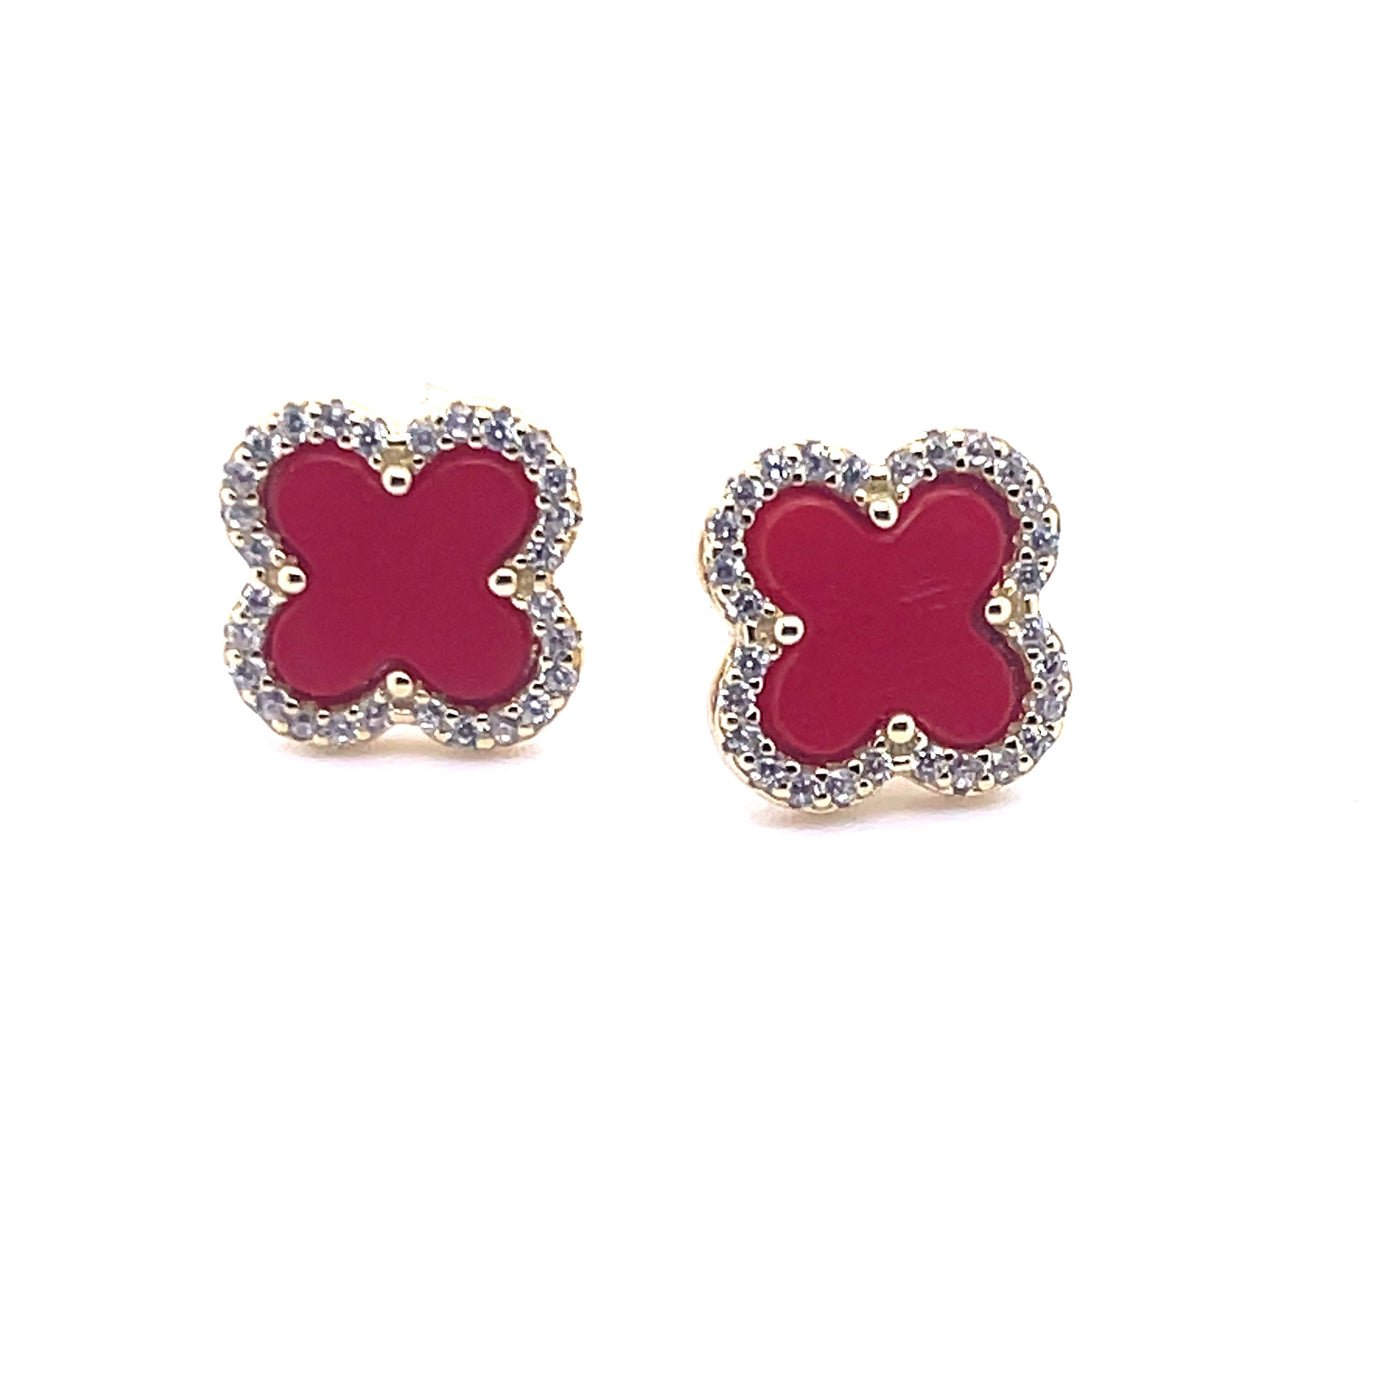 Sterling Silver Rhdoium Plated Clover Earrings With Cz red Centre Stone